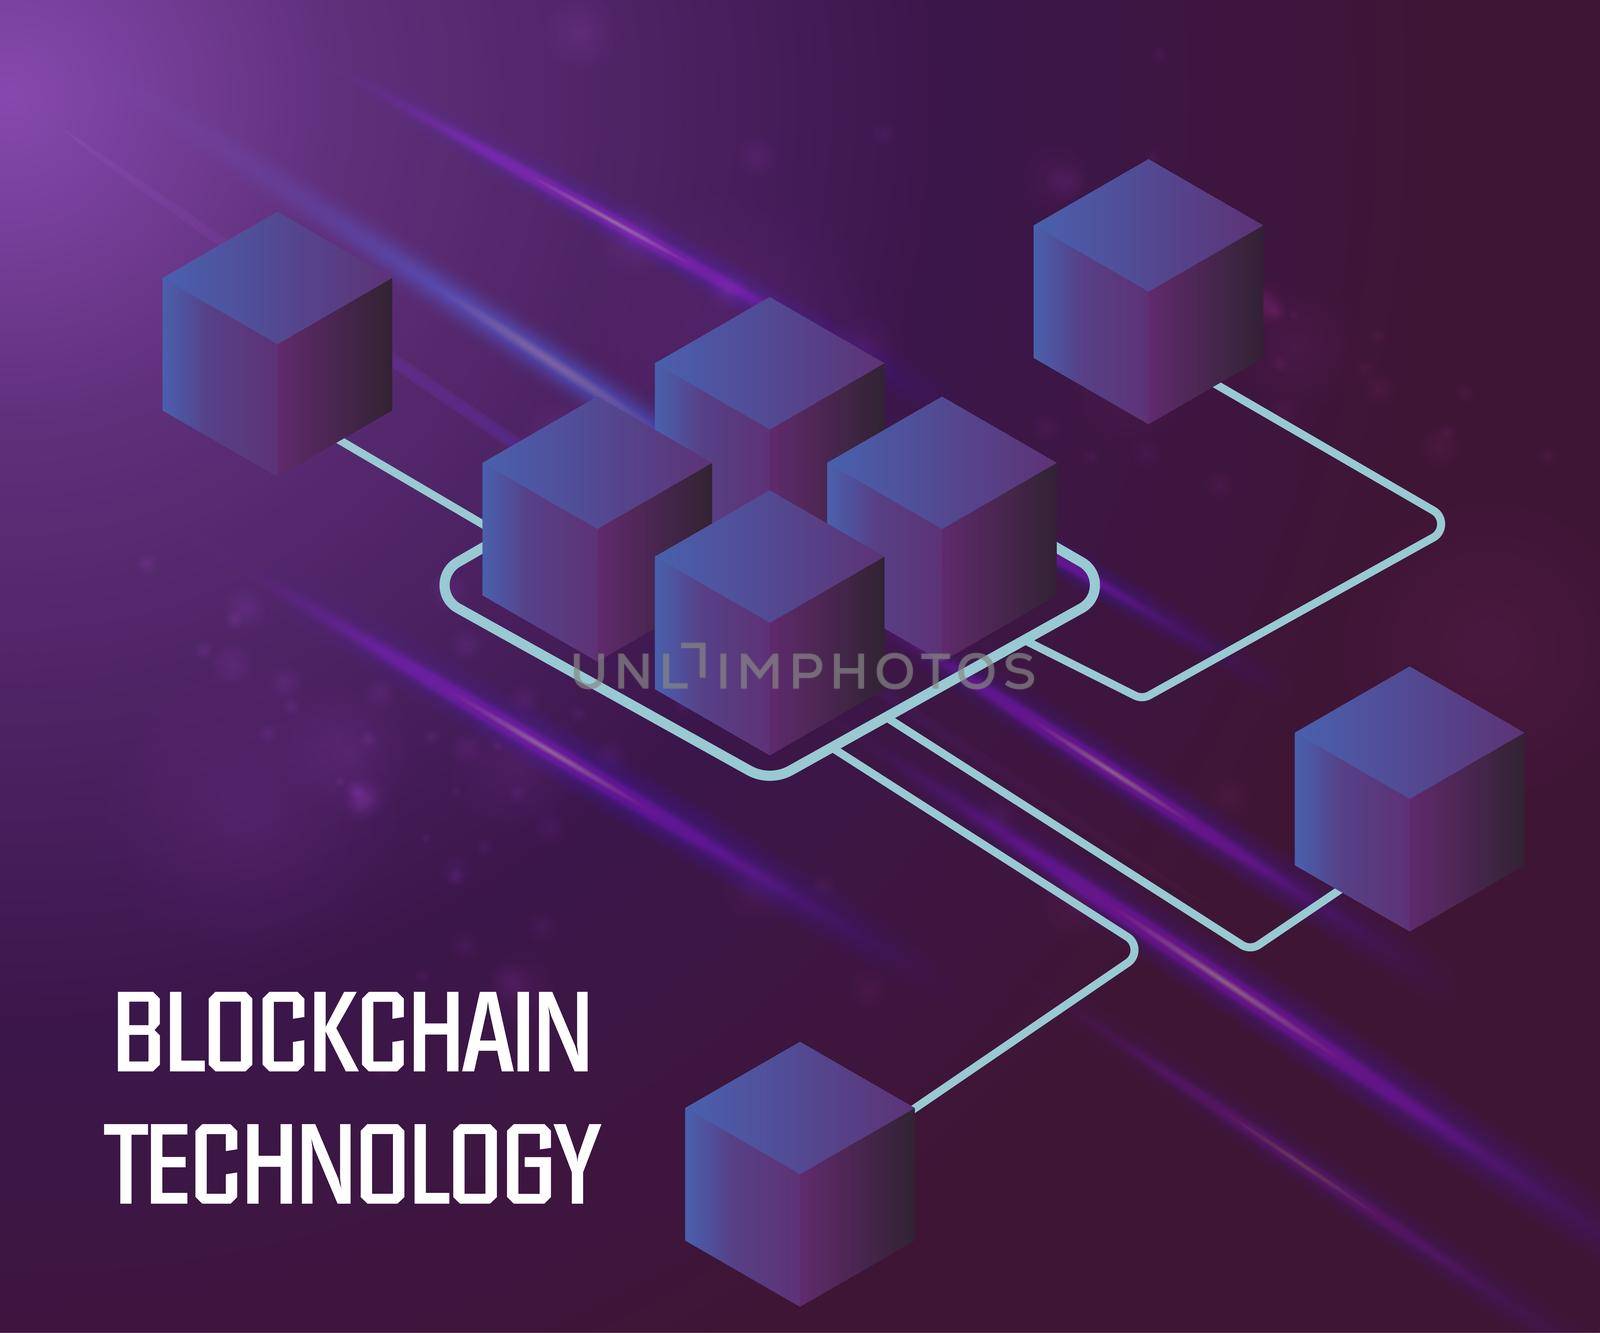 Smart Blockchain Technology background. Connected abstract isometric blocks by ANITA